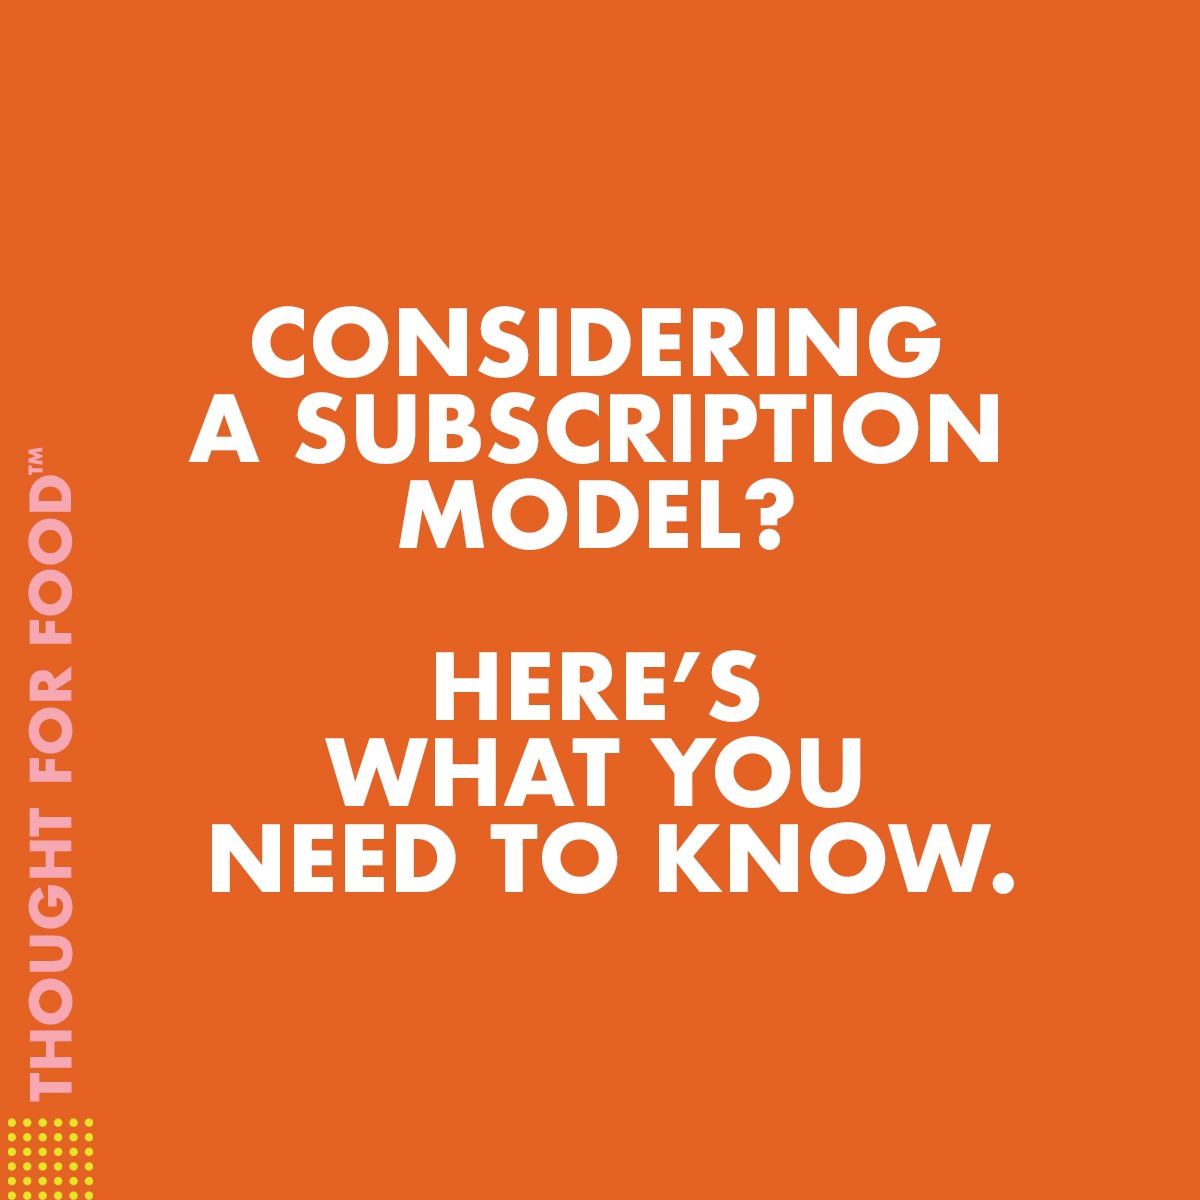 Considering a subscription model? Here's what you need to know.